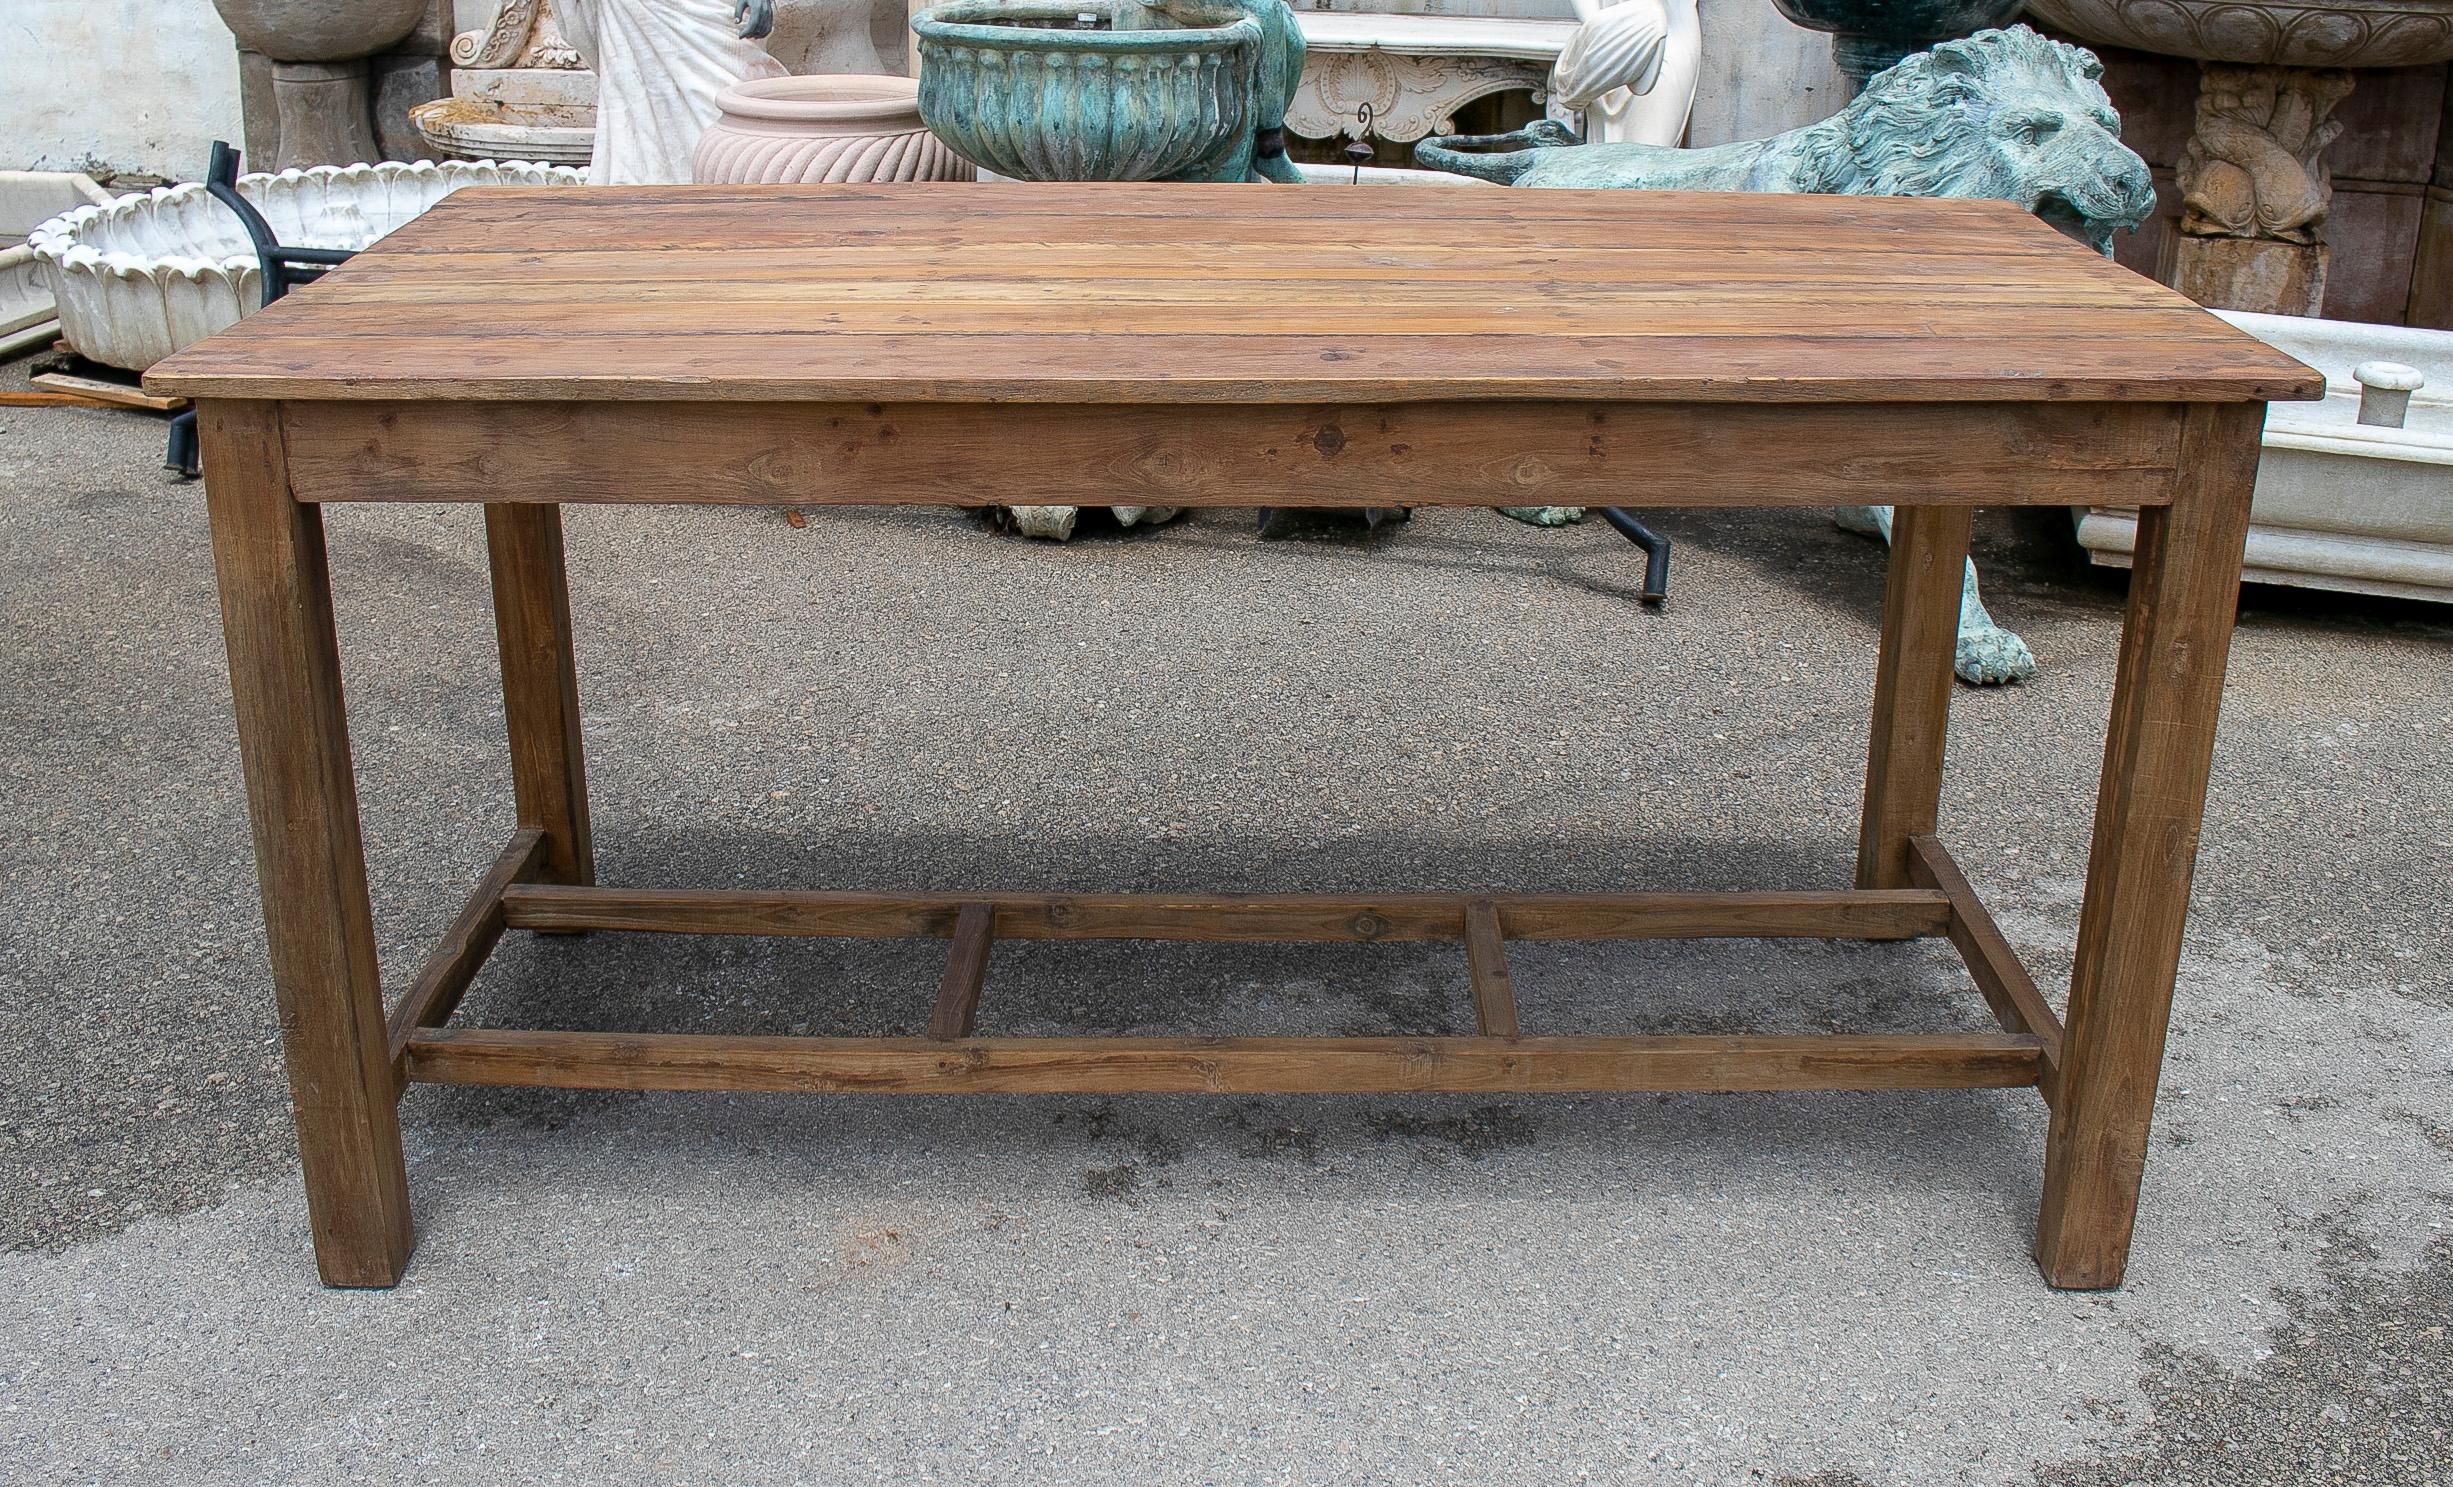 Rustic 1970s Spanish natural wood rustic farmhouse working table with beams.